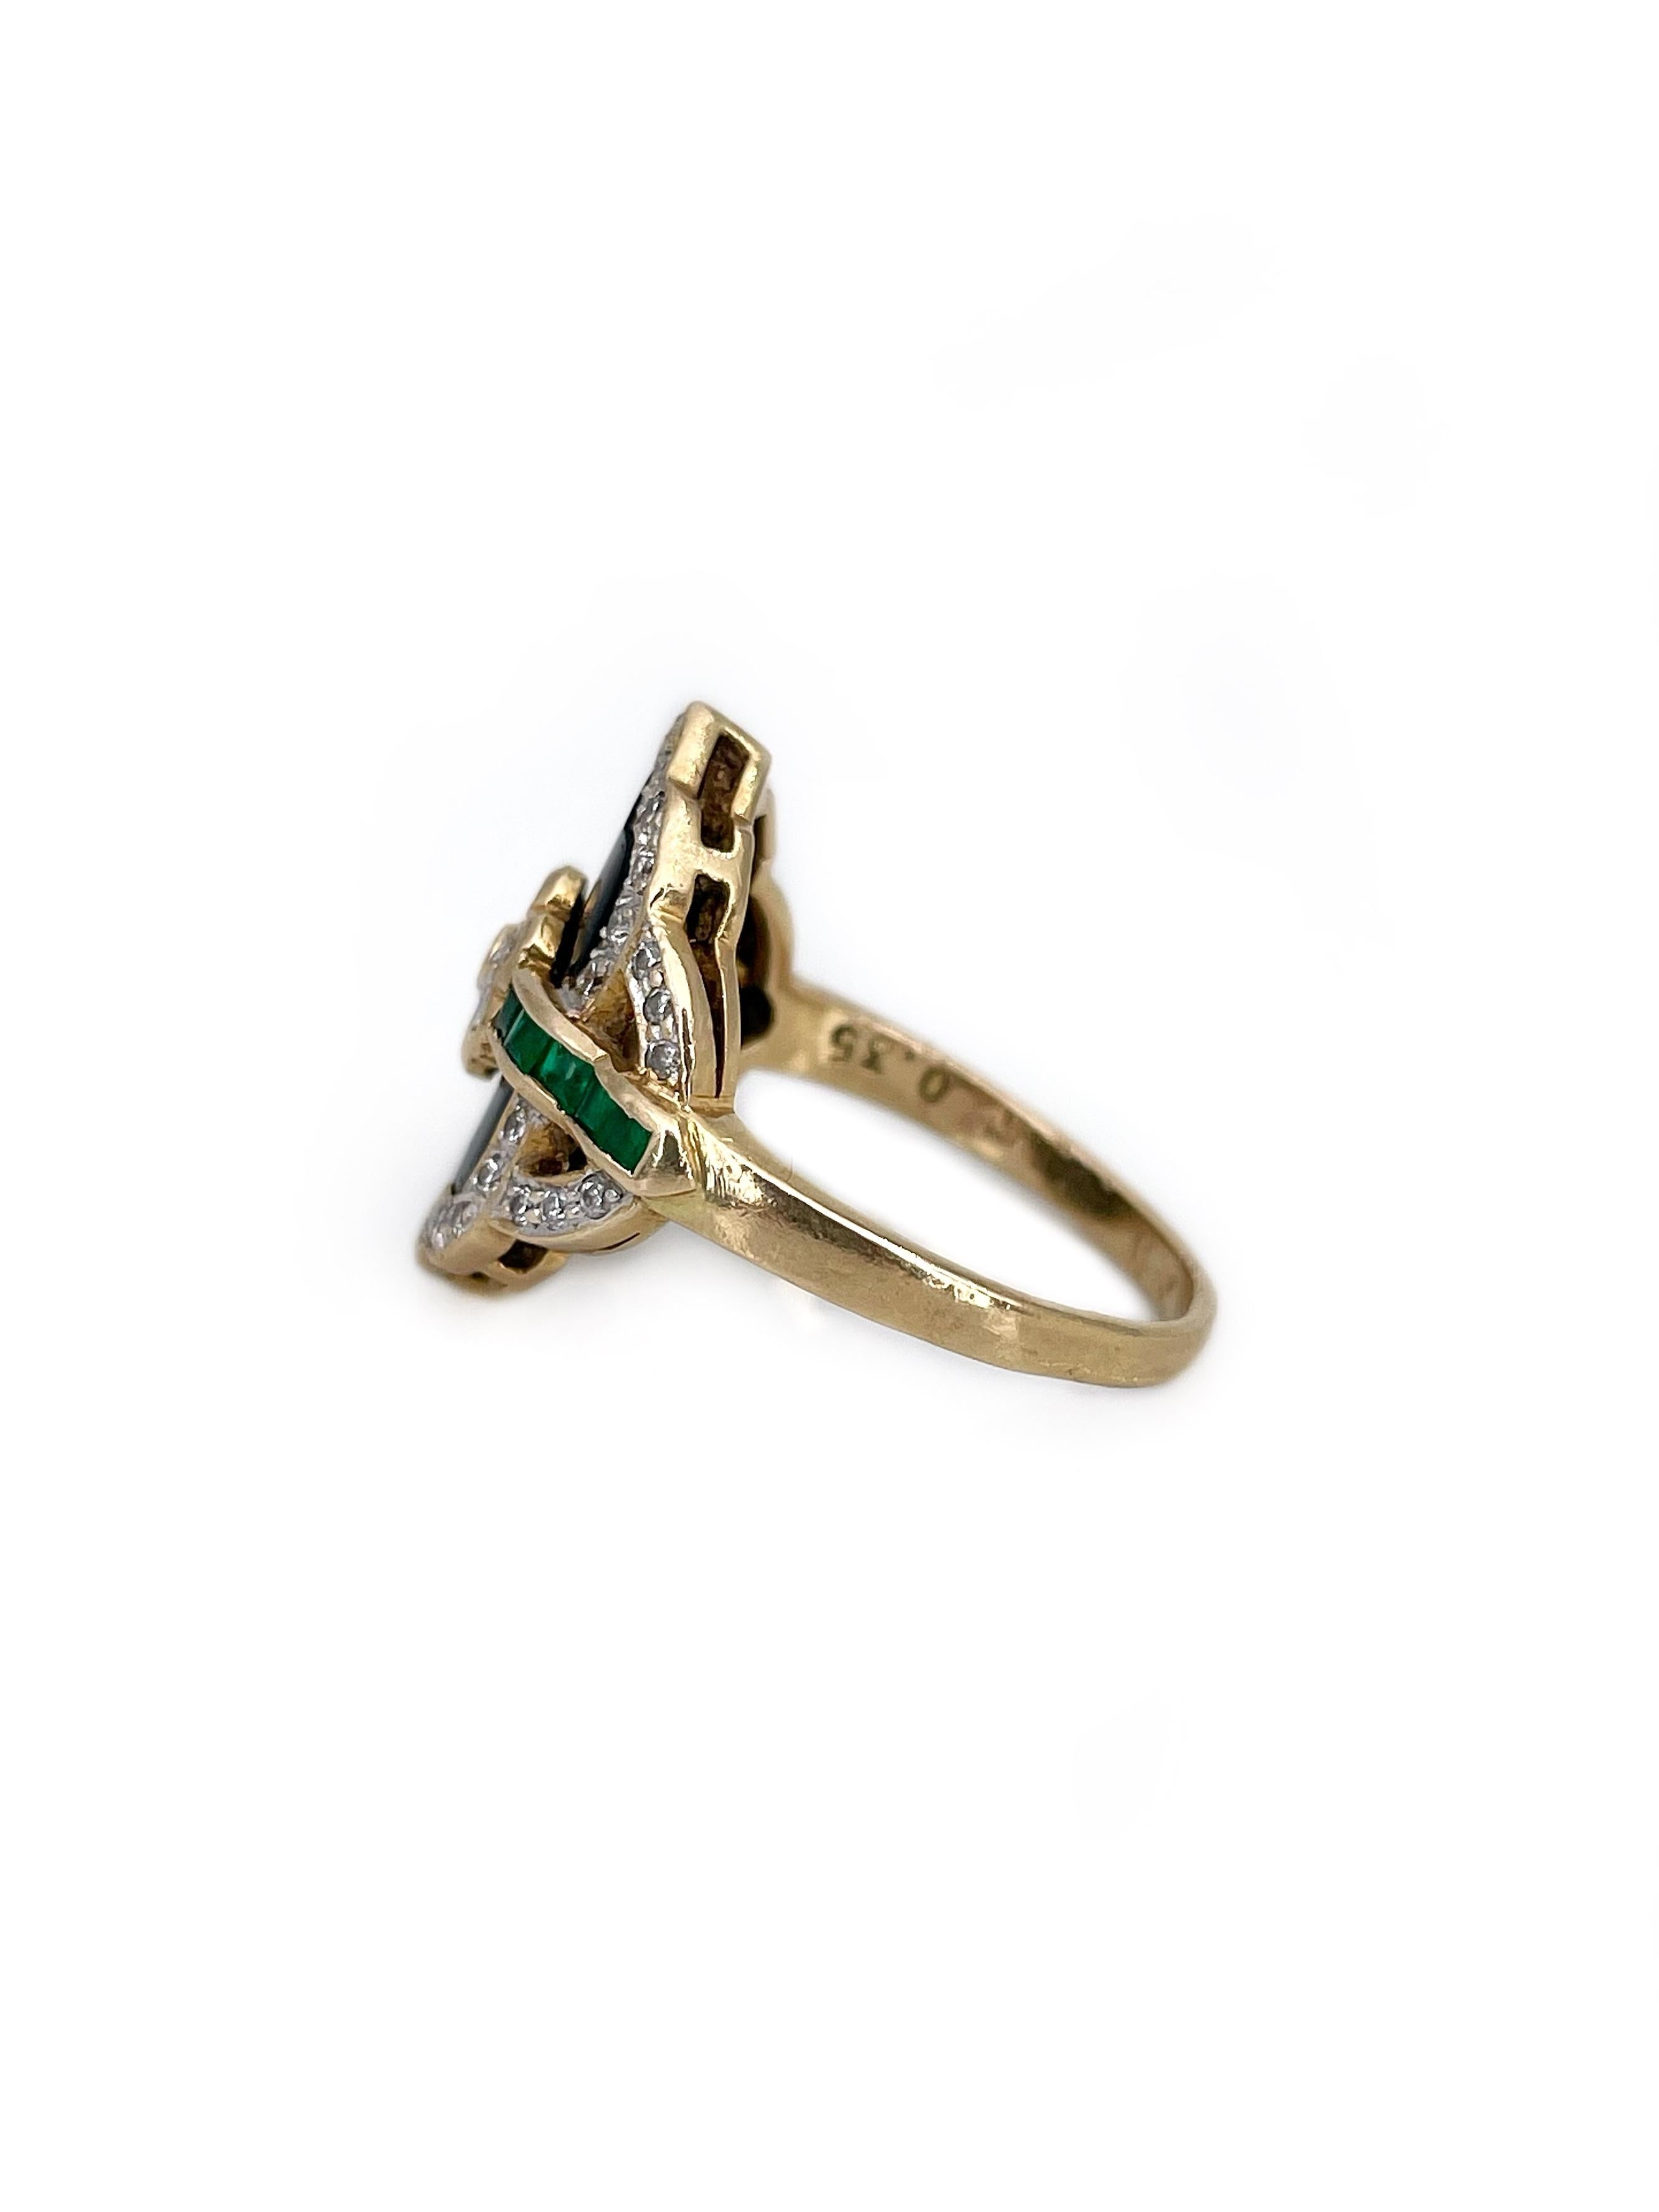 This is a gorgeous design shield ring crafted in 18K yellow gold. The piece features:

- onyx
- 41 pcs. brilliant cut diamonds: TW 0.27ct, RW-W, VS-SI
- 10 pcs. square step cut emeralds: TW 0.14ct, vslbG 6/4, P2

Weight: 4.55g
Size: 16.75